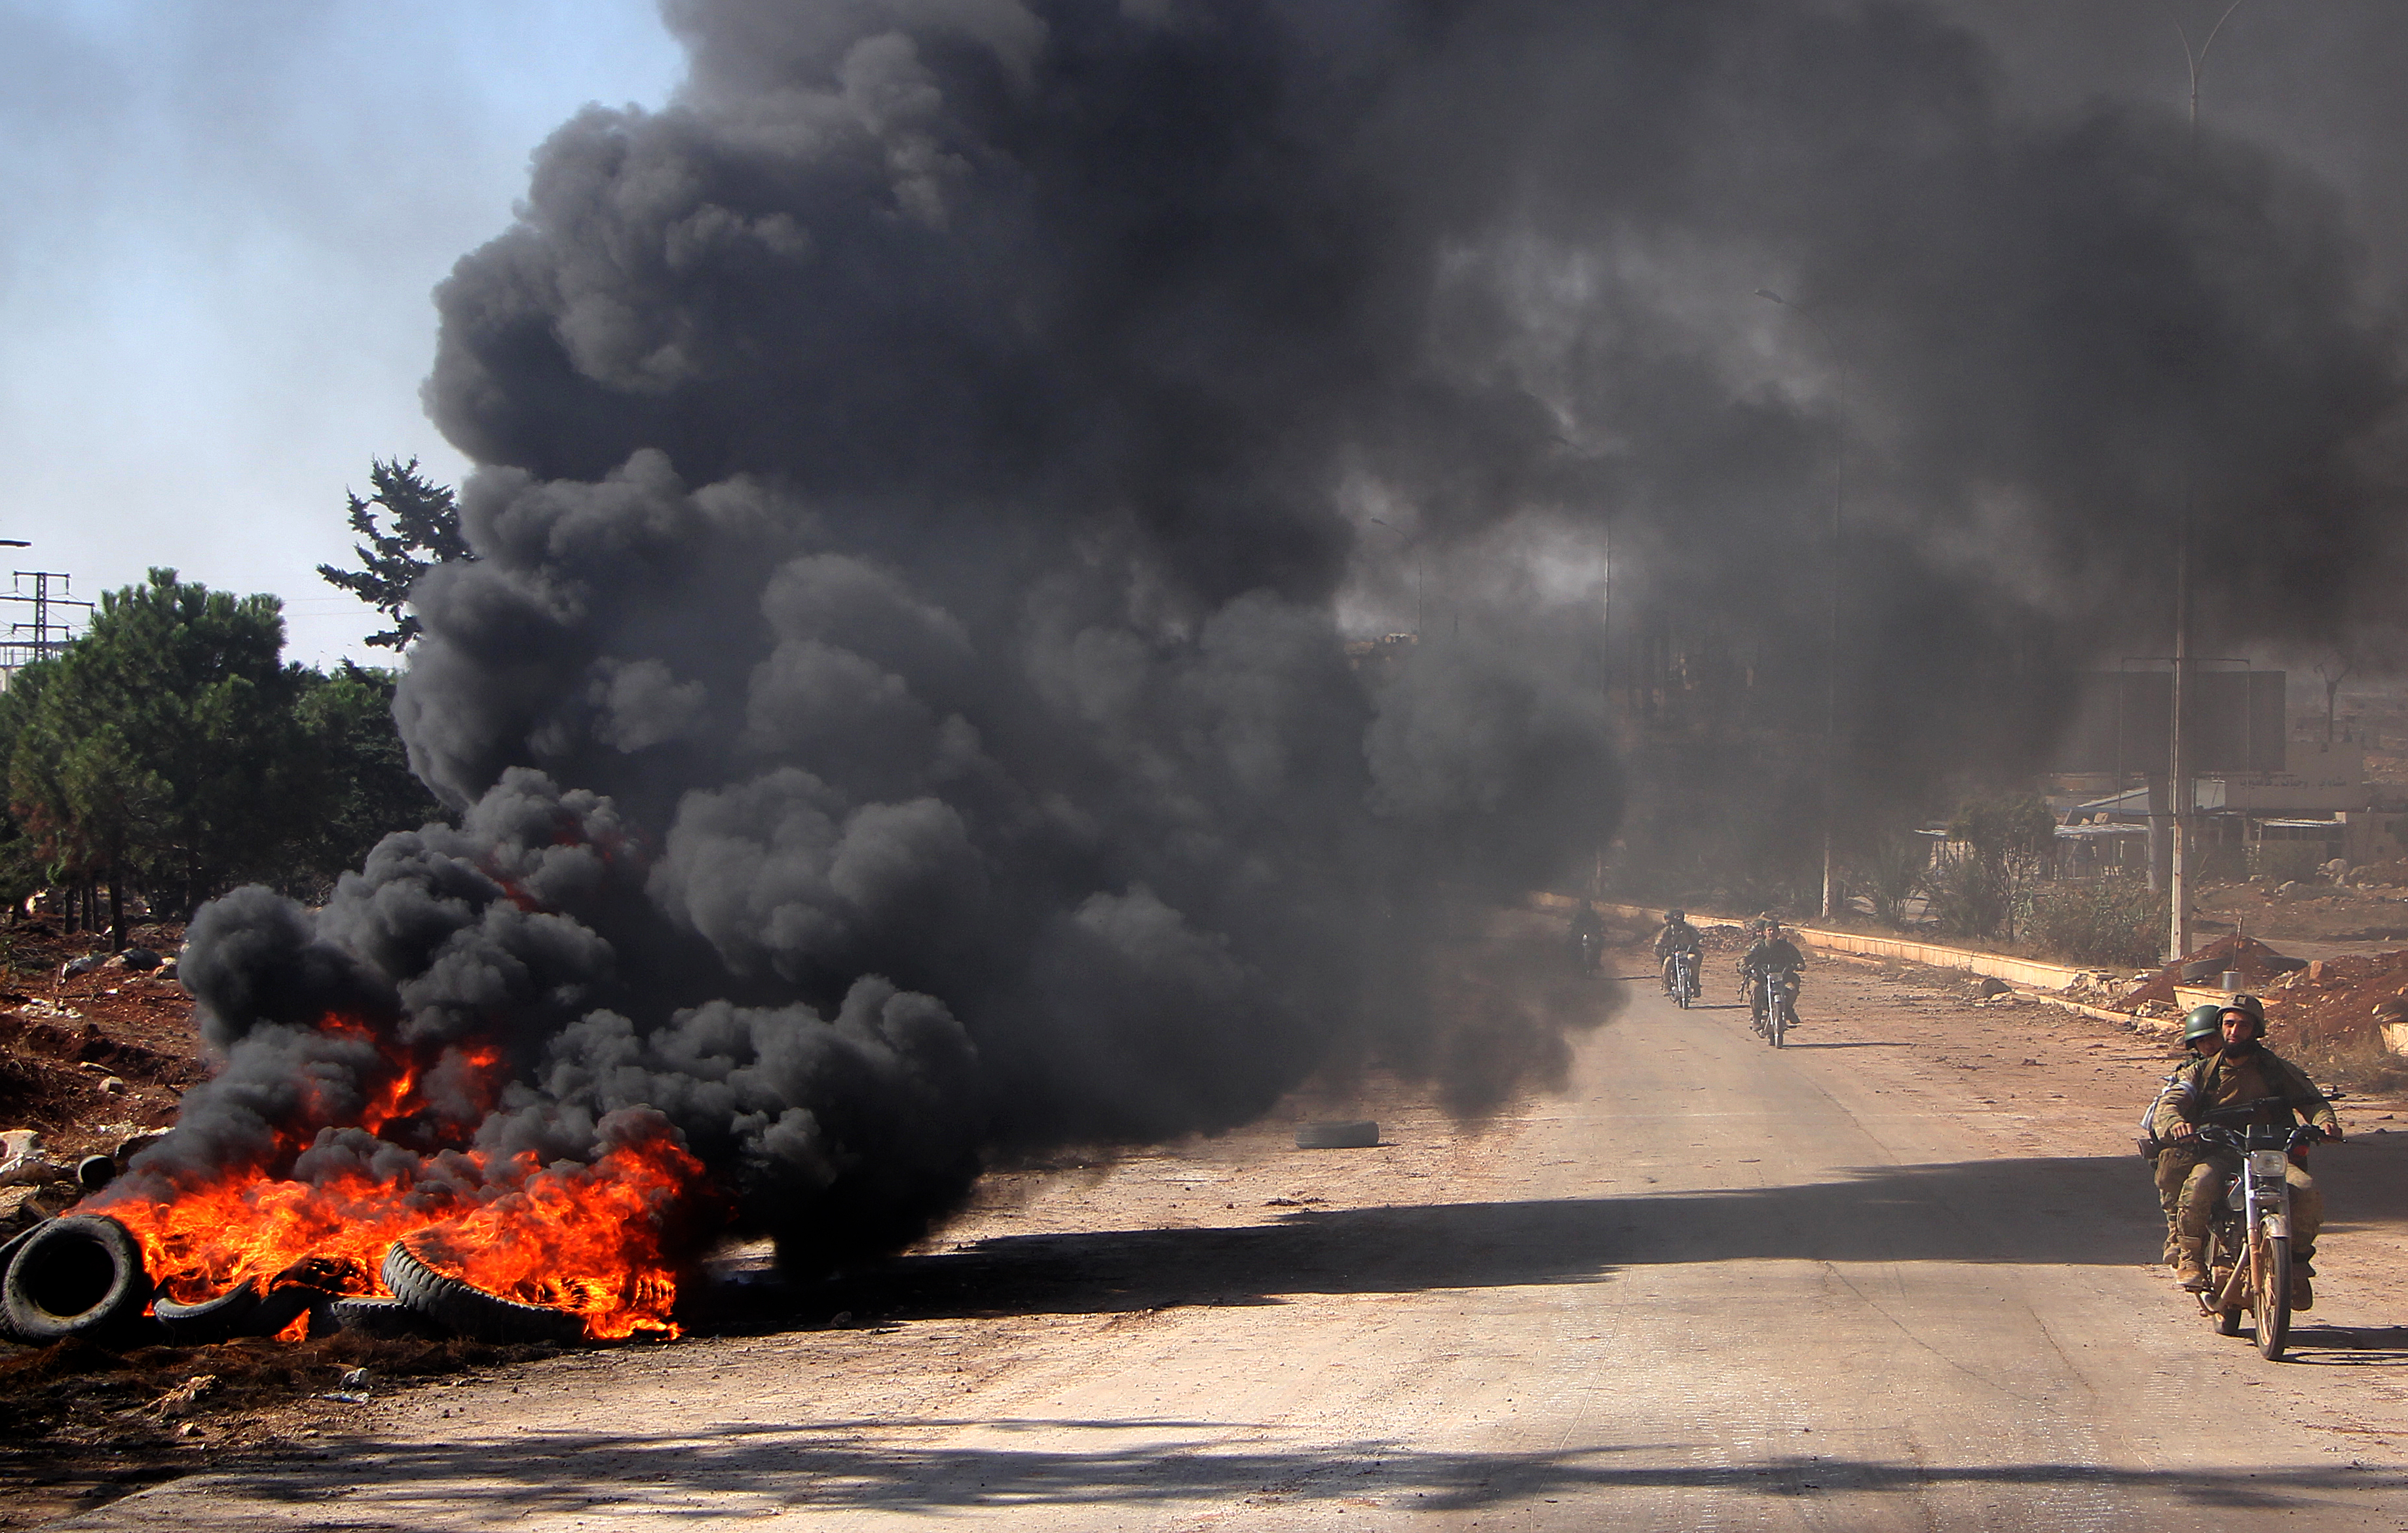 Rebel fighters from the Jaish al-Fatah (or Army of Conquest) brigades drive past burning tyres on November 3, 2016, at an entrance to Aleppo, in the southwestern frontline near the neighbourhood of Dahiyet al-Assad, during a rebel offensive to break a three-month siege of the opposition-held east of Syria's second city.  Syrian rebels launched a new wave of car bombs and rockets on Aleppo's western districts, redoubling their efforts to break the government's three-month siege of the city. / AFP PHOTO / Omar haj kadour